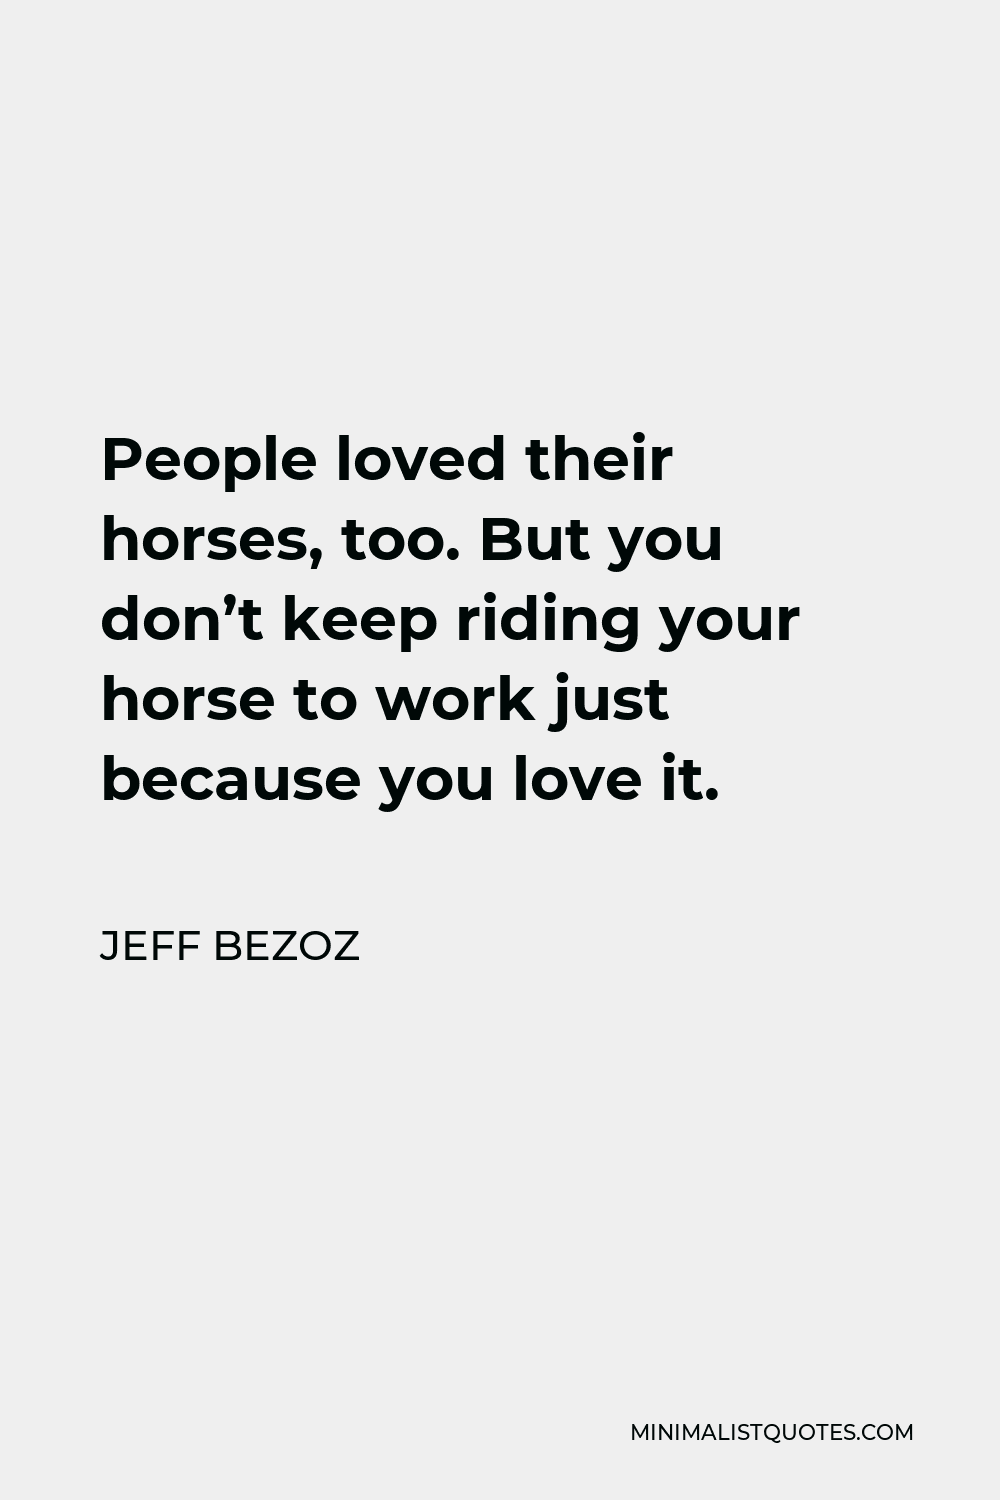 Jeff Bezoz Quote - People loved their horses, too. But you don’t keep riding your horse to work just because you love it.